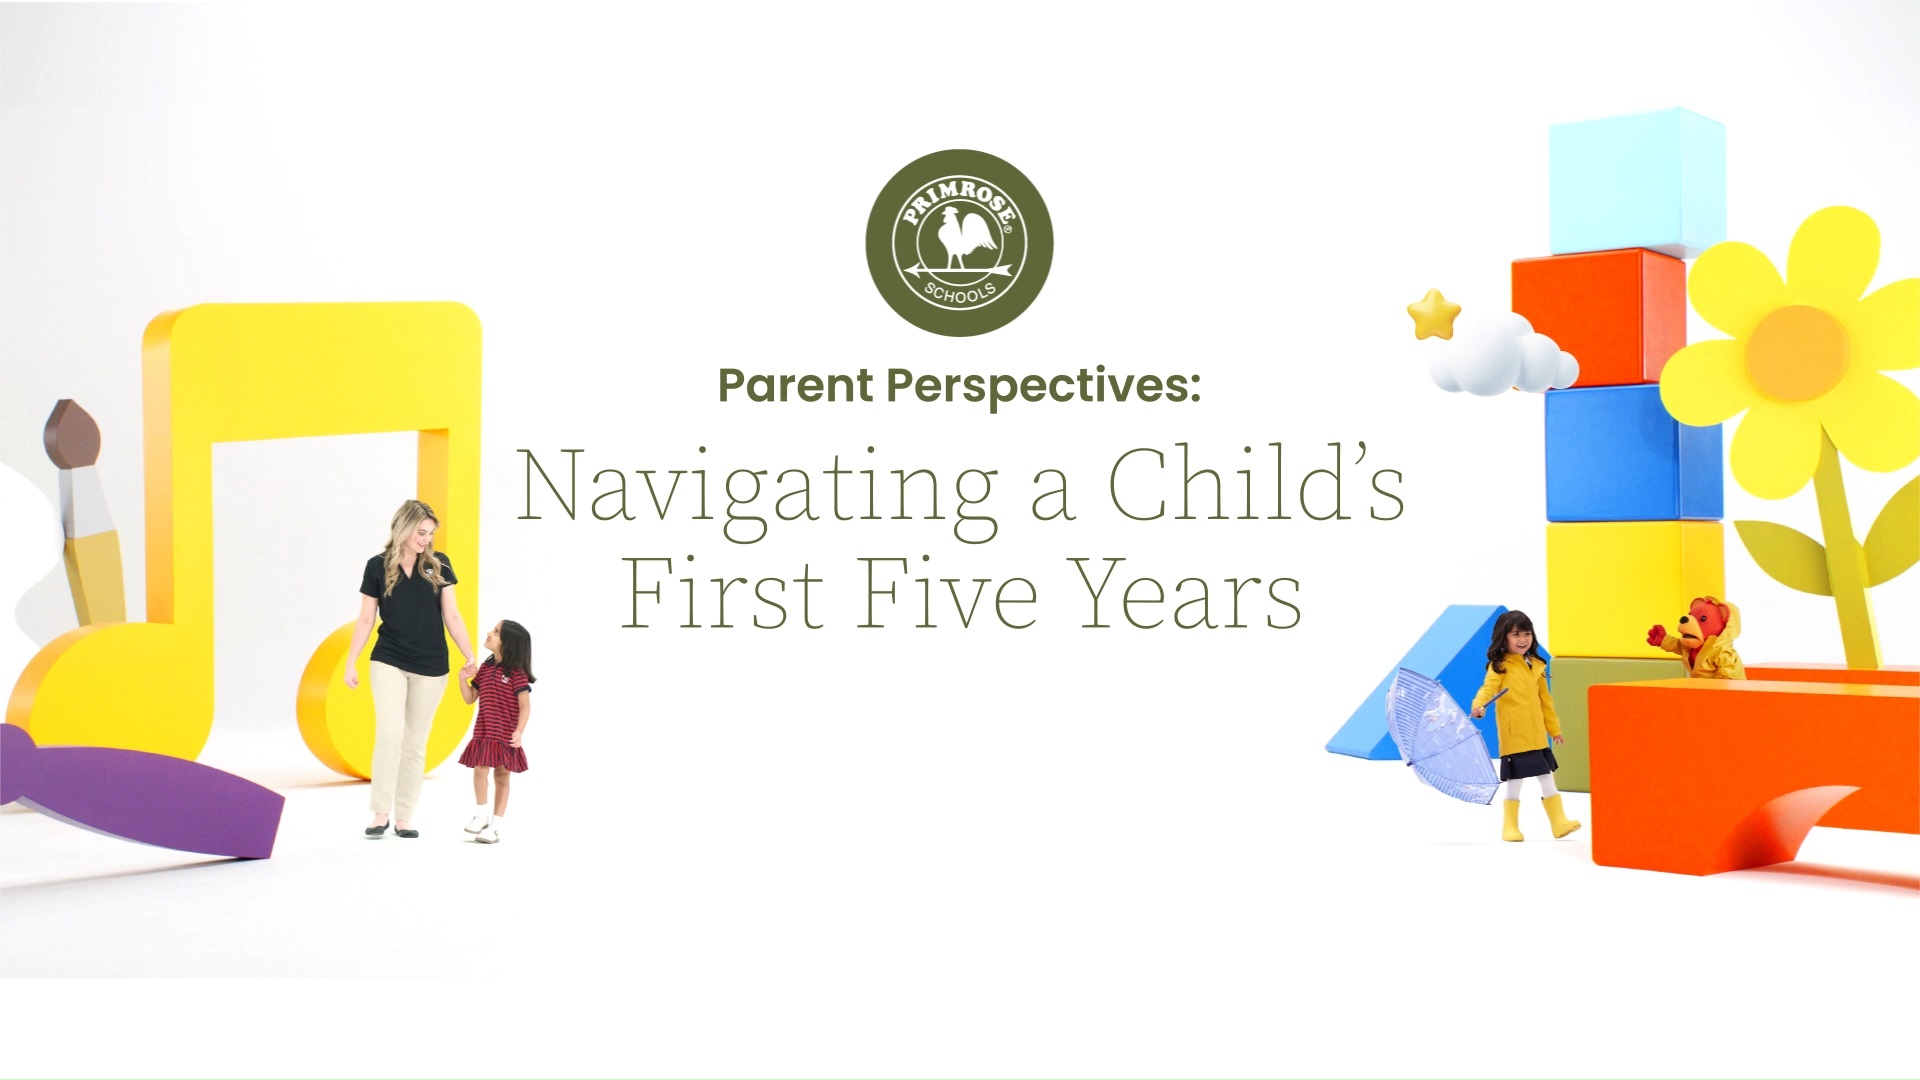 National Survey Finds 59% of Parents are Concerned about Their Child's Development